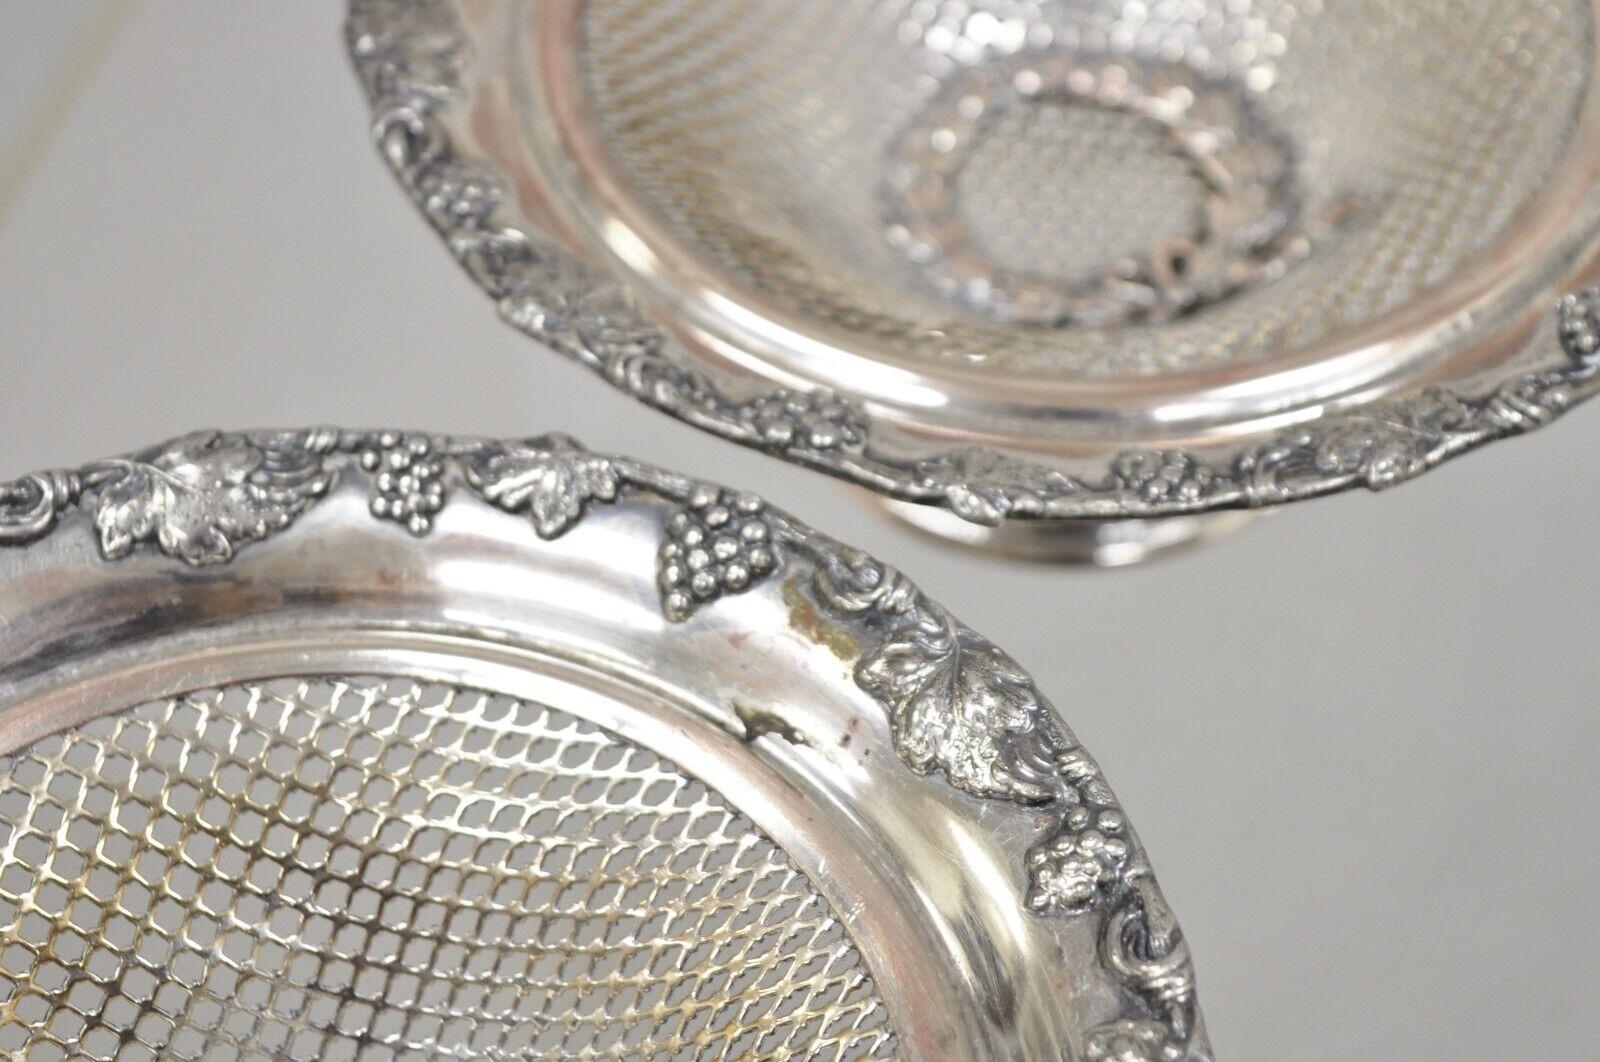 English Edwardian Silver Plated Wreath Design Small Mesh Basket Candy Dish -Pair For Sale 4